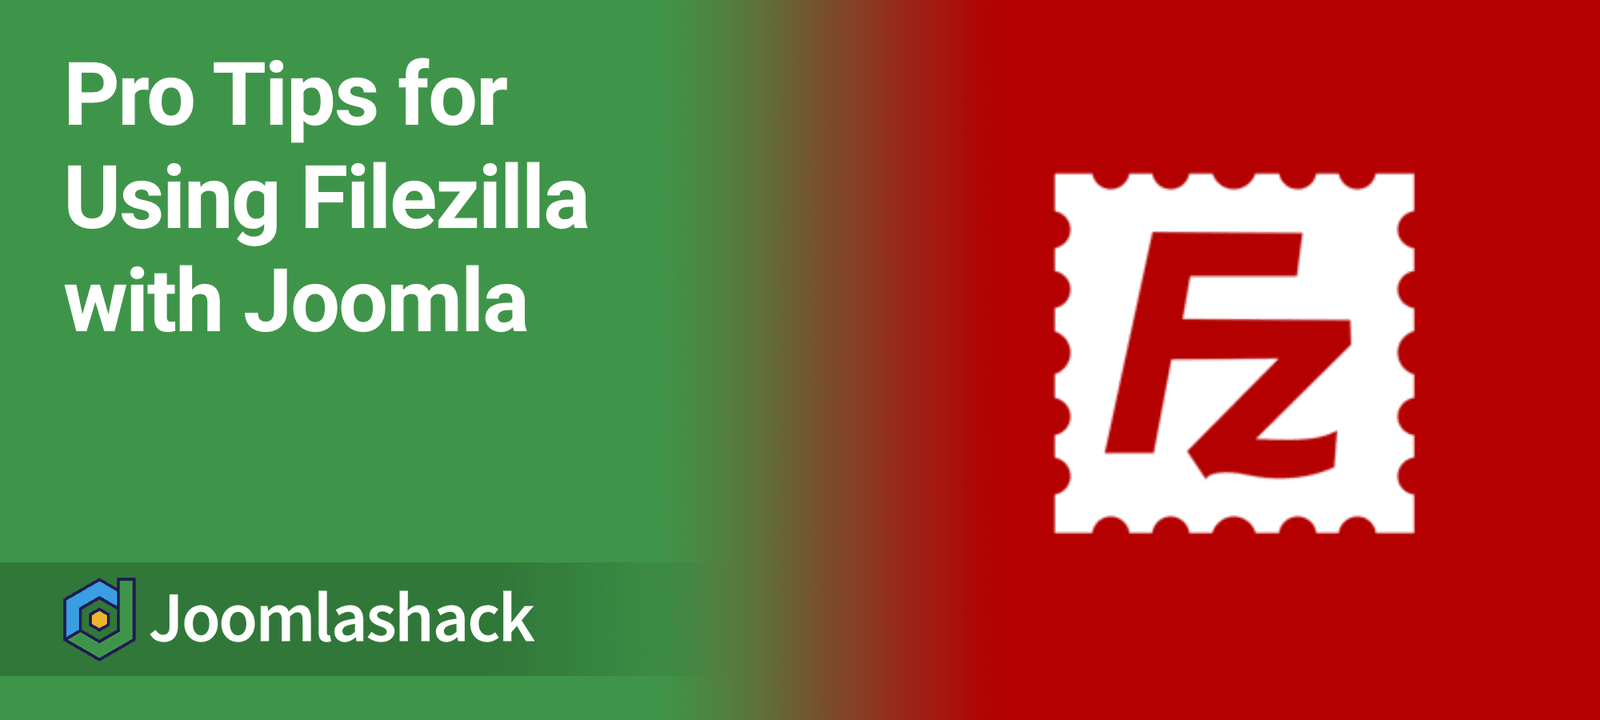 Pro Tips for Using Filezilla with Joomla